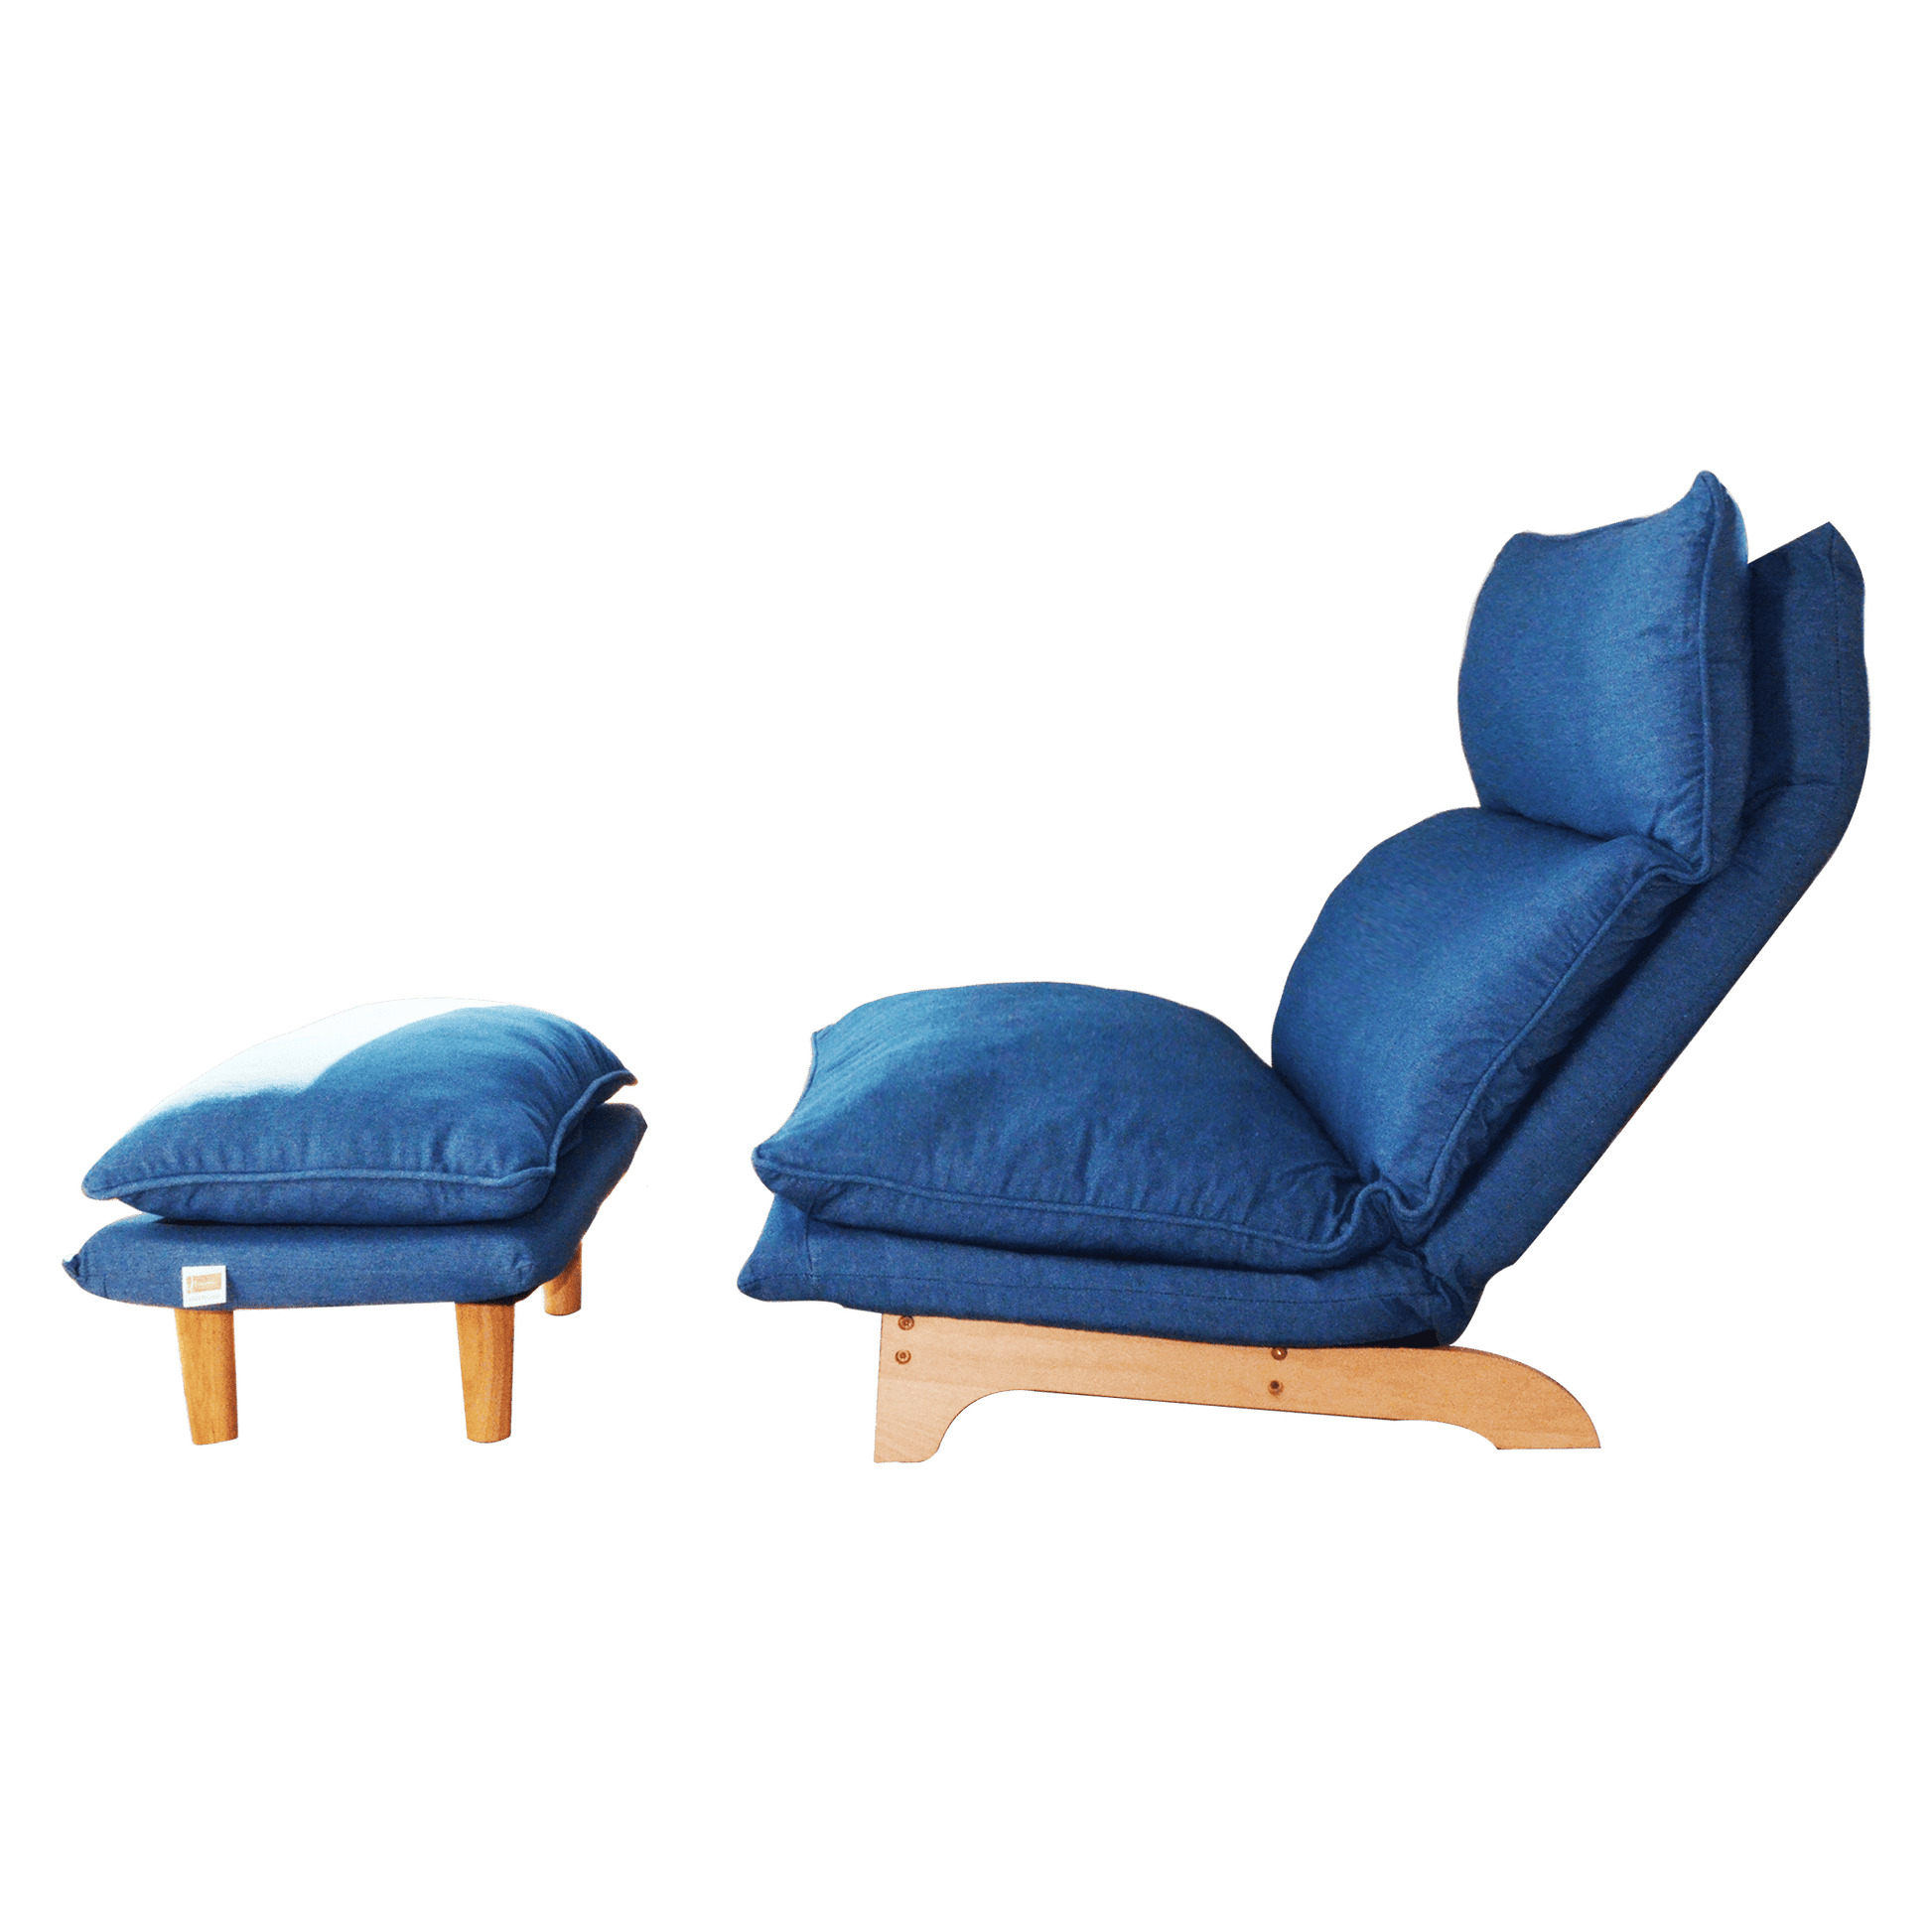 1st Choice Furniture Direct Chair 1st Choice Modern Foldable Reclining Lazy Chair in Dark Blue Finish